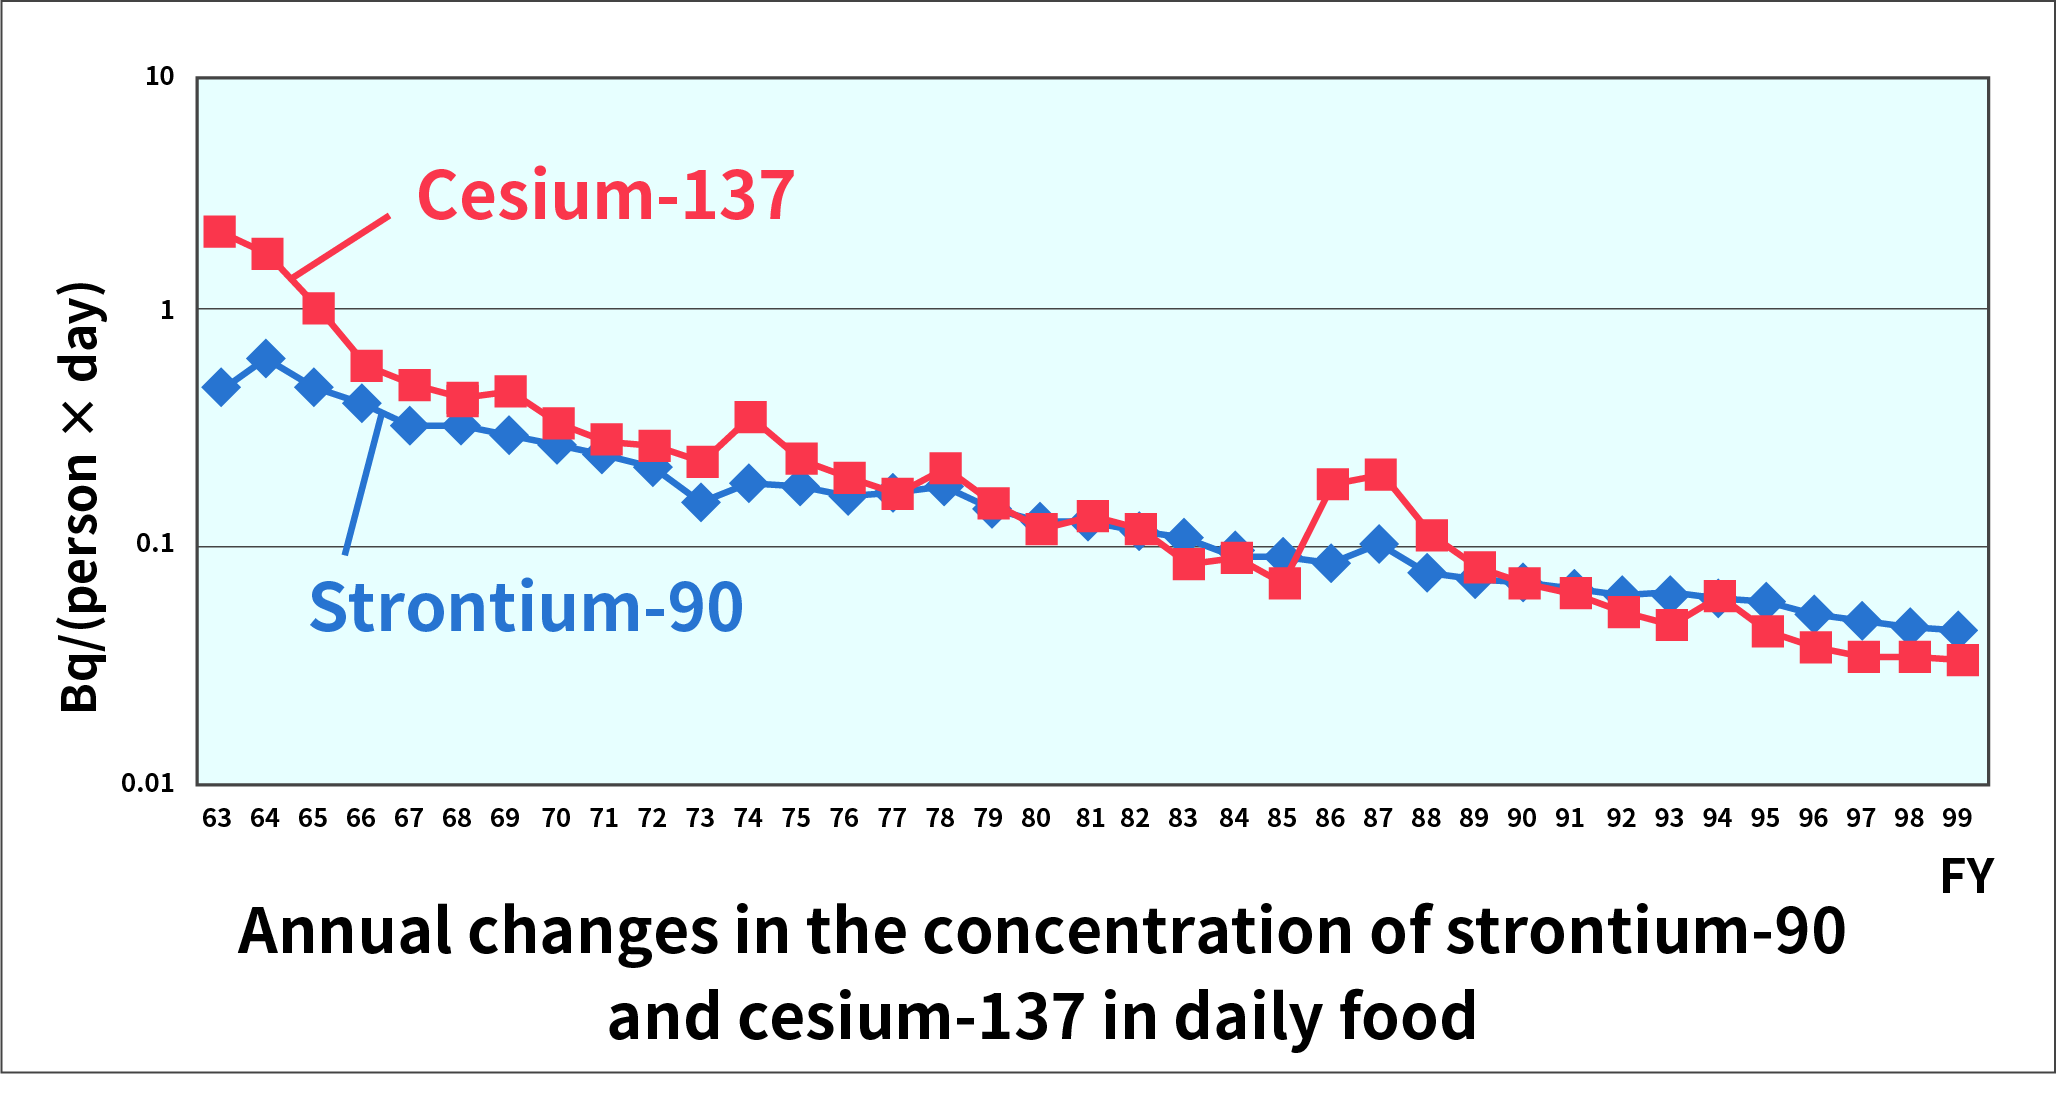 Annual changes in the concentration of strontium-90 and cesium-137 in daily food